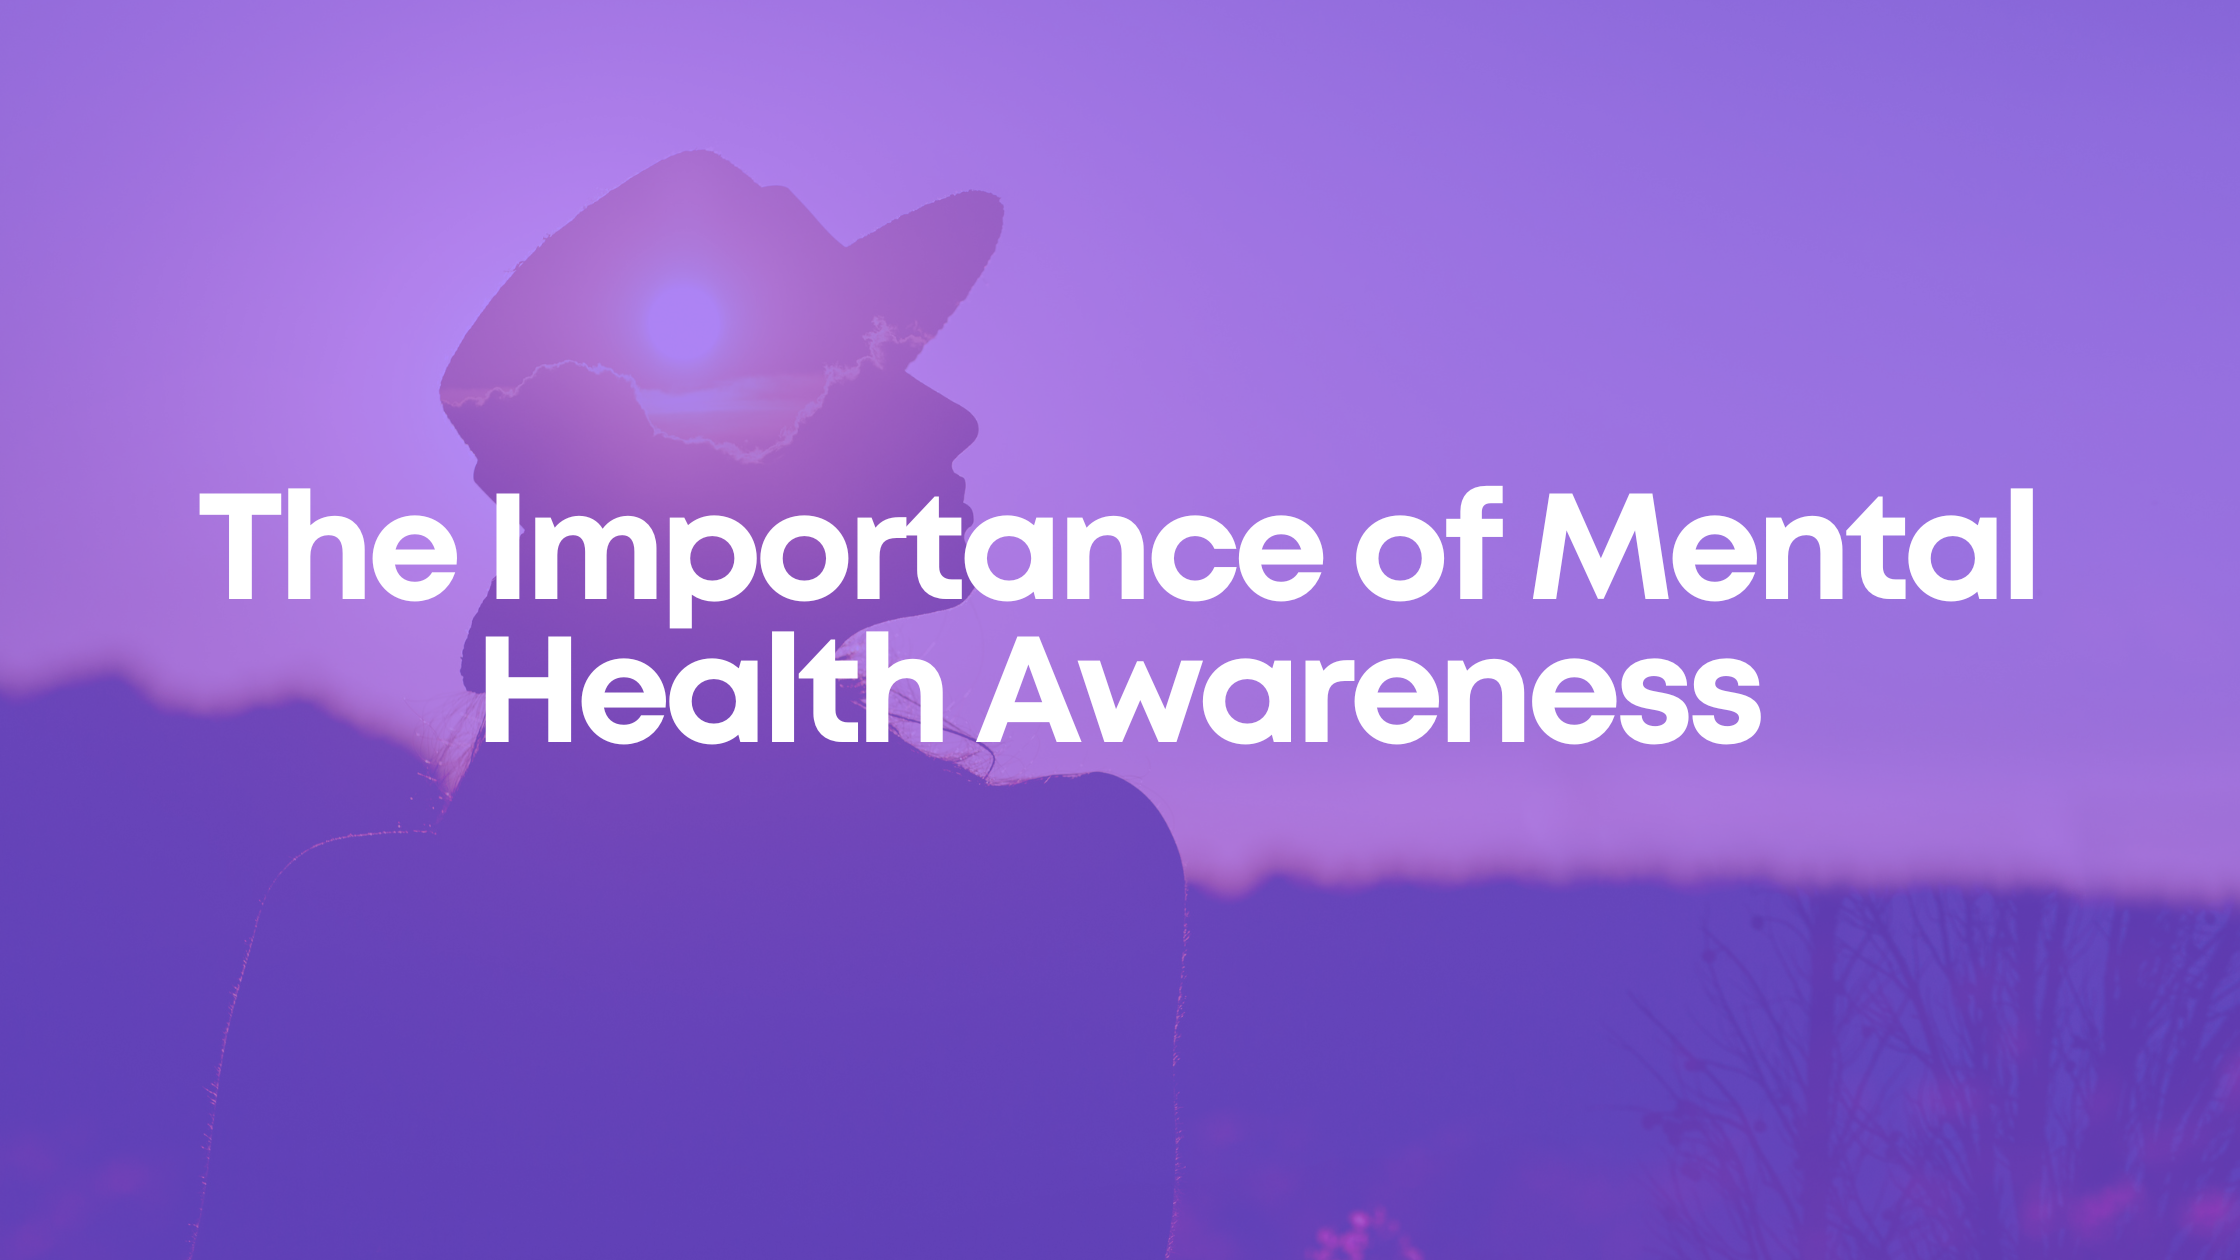 You are currently viewing The Importance of Mental Health Awareness: Top 10 Reasons You Should Know More